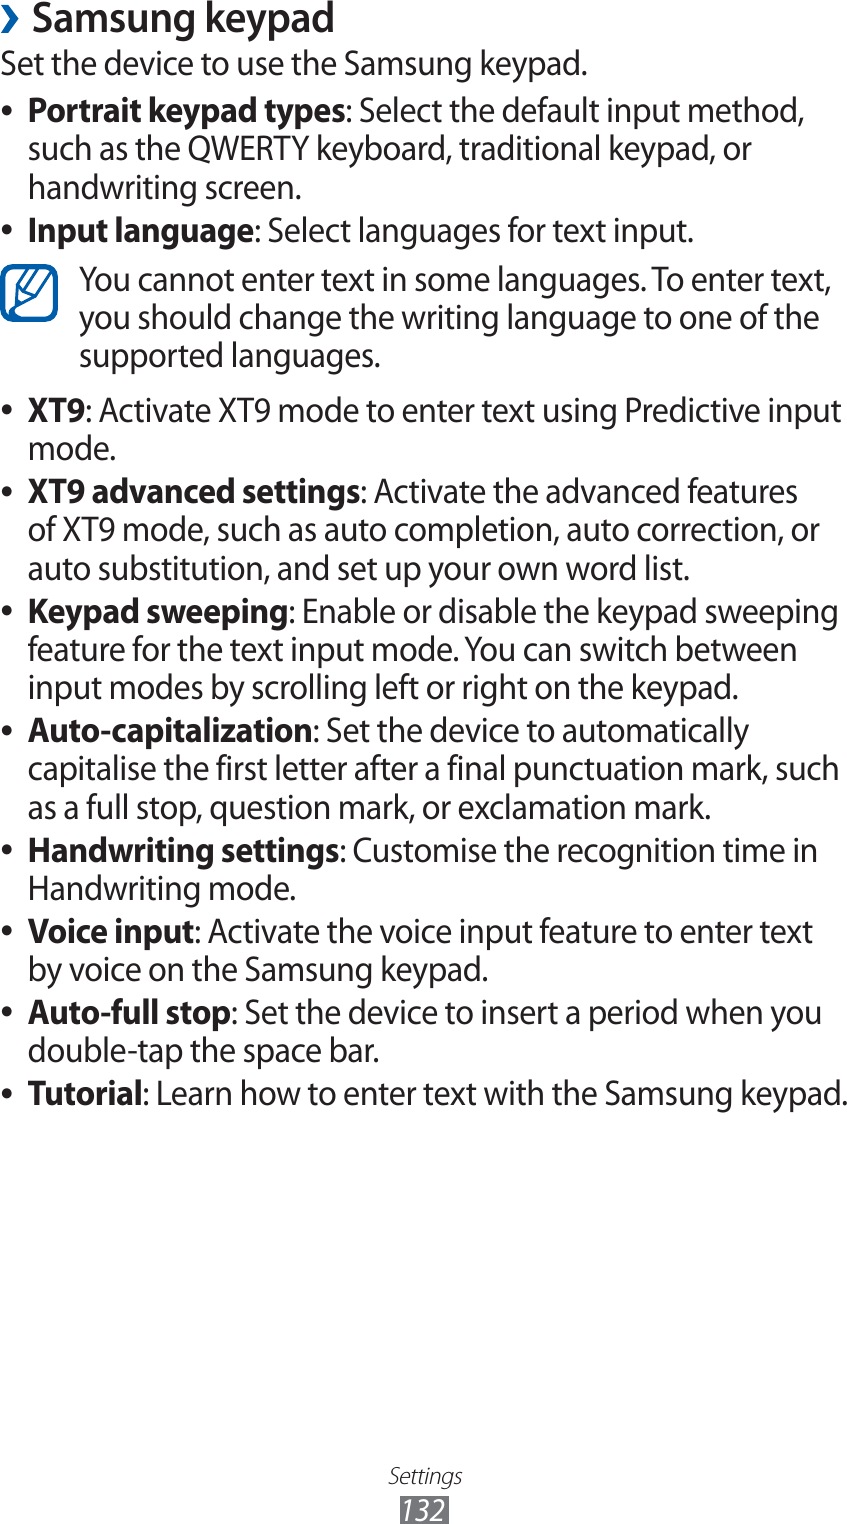 Settings132Samsung keypad ›Set the device to use the Samsung keypad.Portrait keypad types ●: Select the default input method, such as the QWERTY keyboard, traditional keypad, or handwriting screen.Input language ●: Select languages for text input.You cannot enter text in some languages. To enter text, you should change the writing language to one of the supported languages. XT9 ●: Activate XT9 mode to enter text using Predictive input mode.XT9 advanced settings ●: Activate the advanced features of XT9 mode, such as auto completion, auto correction, or auto substitution, and set up your own word list.Keypad sweeping ●: Enable or disable the keypad sweeping feature for the text input mode. You can switch between input modes by scrolling left or right on the keypad.Auto-capitalization ●: Set the device to automatically capitalise the first letter after a final punctuation mark, such as a full stop, question mark, or exclamation mark.Handwriting settings ●: Customise the recognition time in Handwriting mode.Voice input ●: Activate the voice input feature to enter text by voice on the Samsung keypad.Auto-full stop ●: Set the device to insert a period when you double-tap the space bar.Tutorial ●: Learn how to enter text with the Samsung keypad.